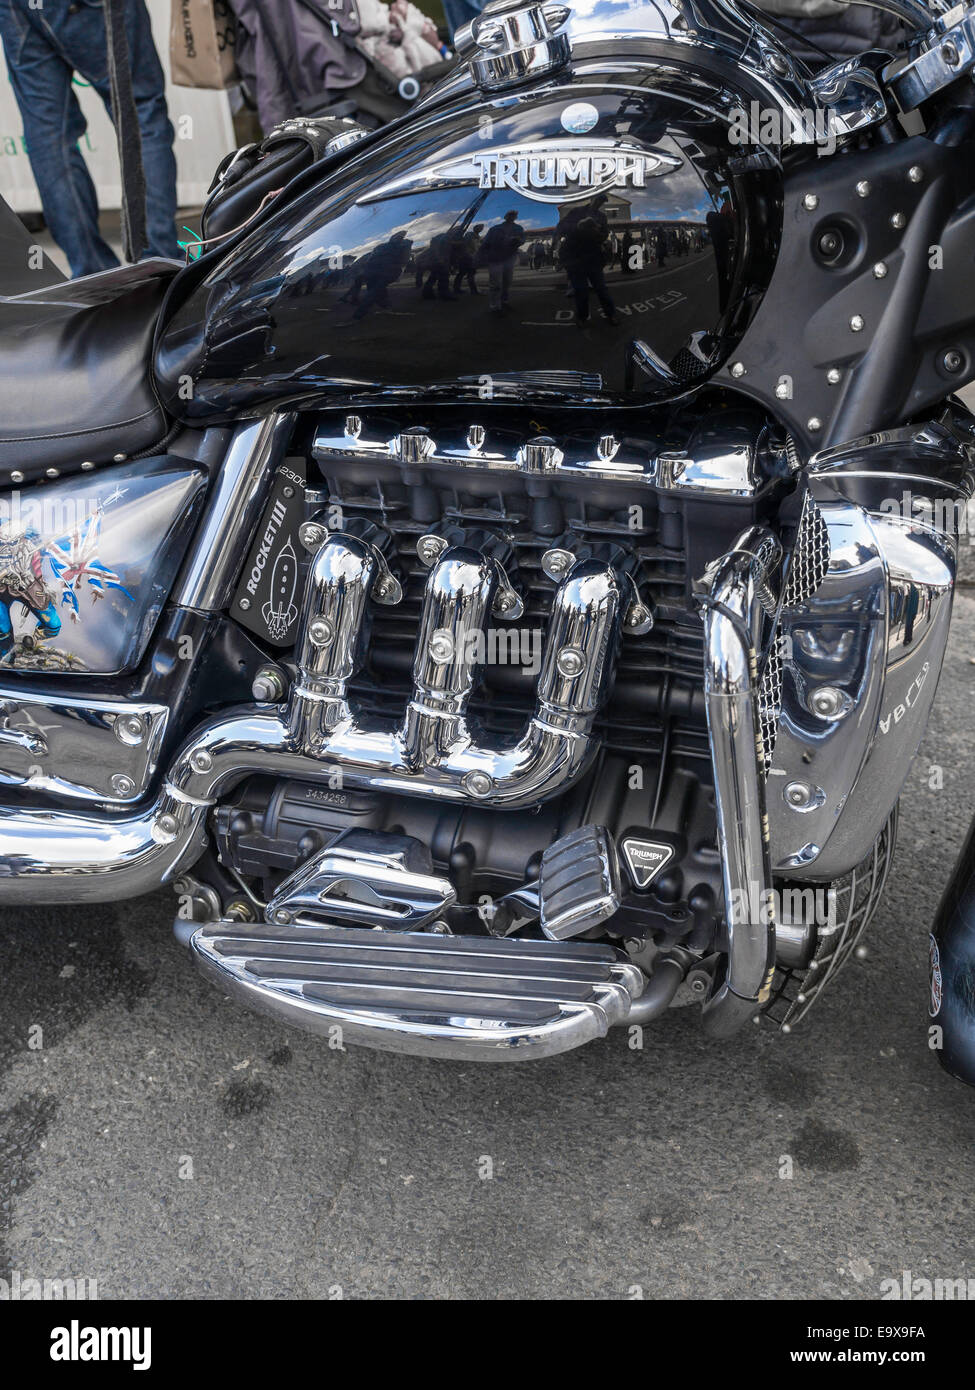 Engine detail Triumph Rocket III  2.3 litre  three cylinder enthusiasts sophisticated high powered roadster cruising motor cycle Stock Photo